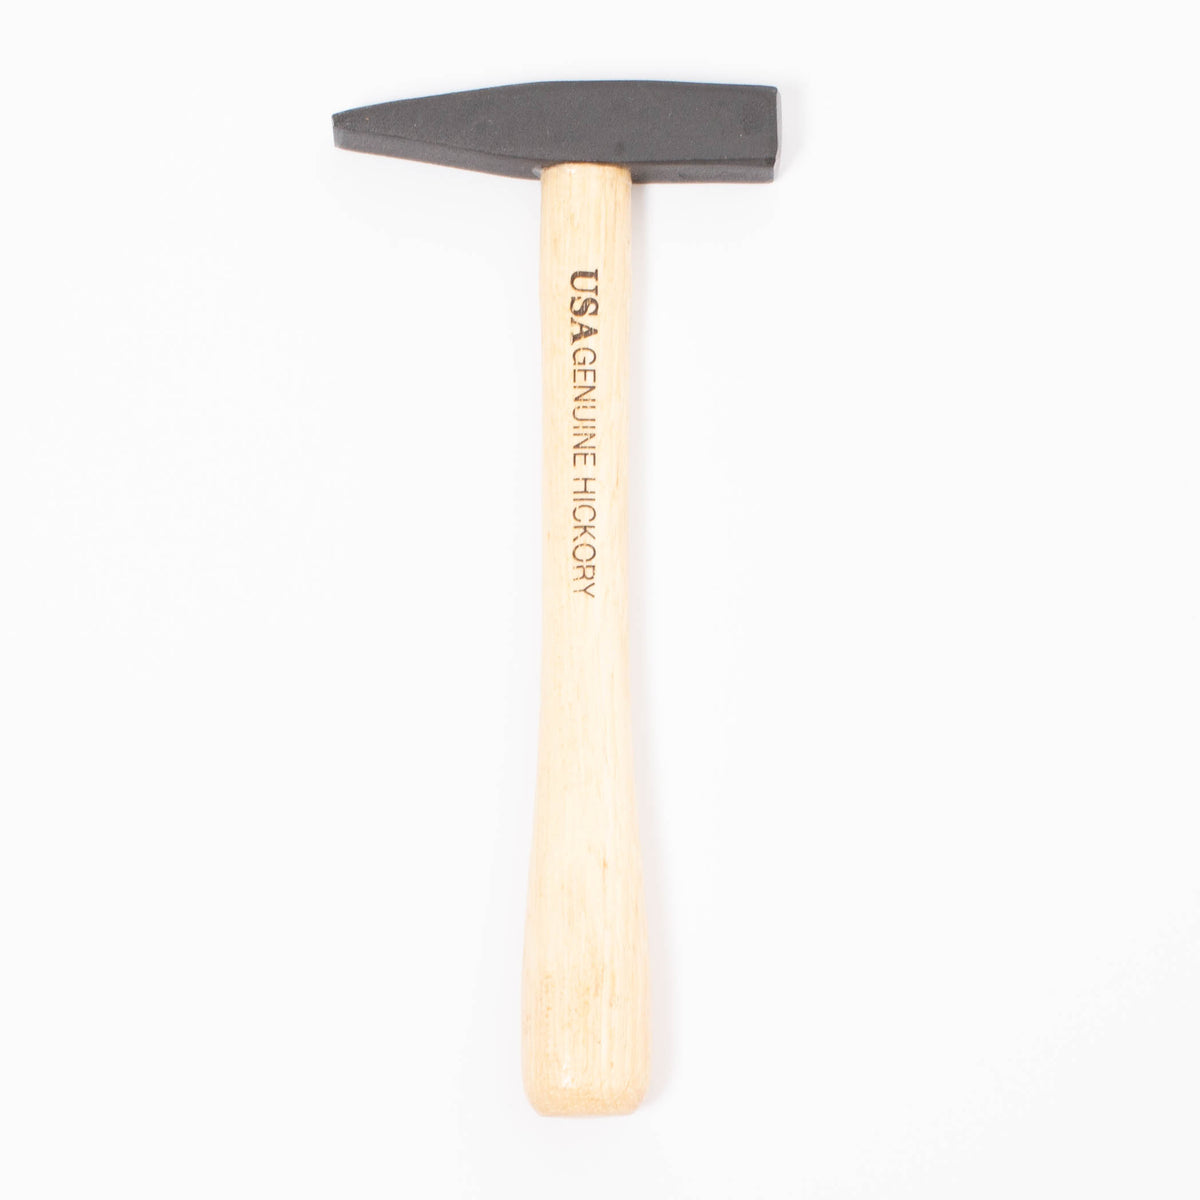 Kids Craft Hammer with Wooden Handle